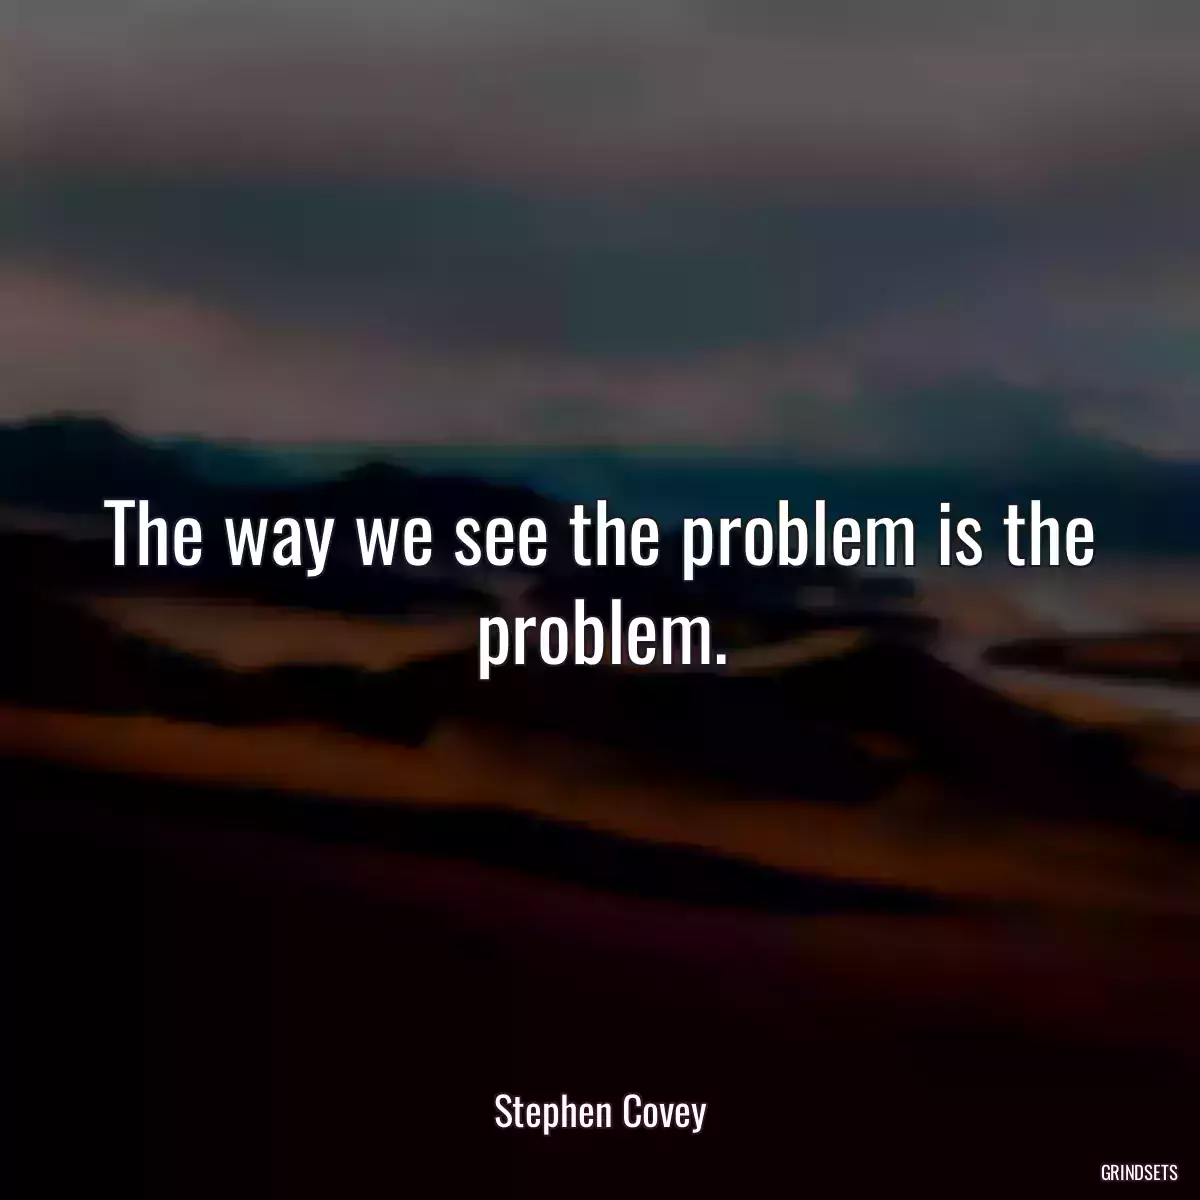 The way we see the problem is the problem.